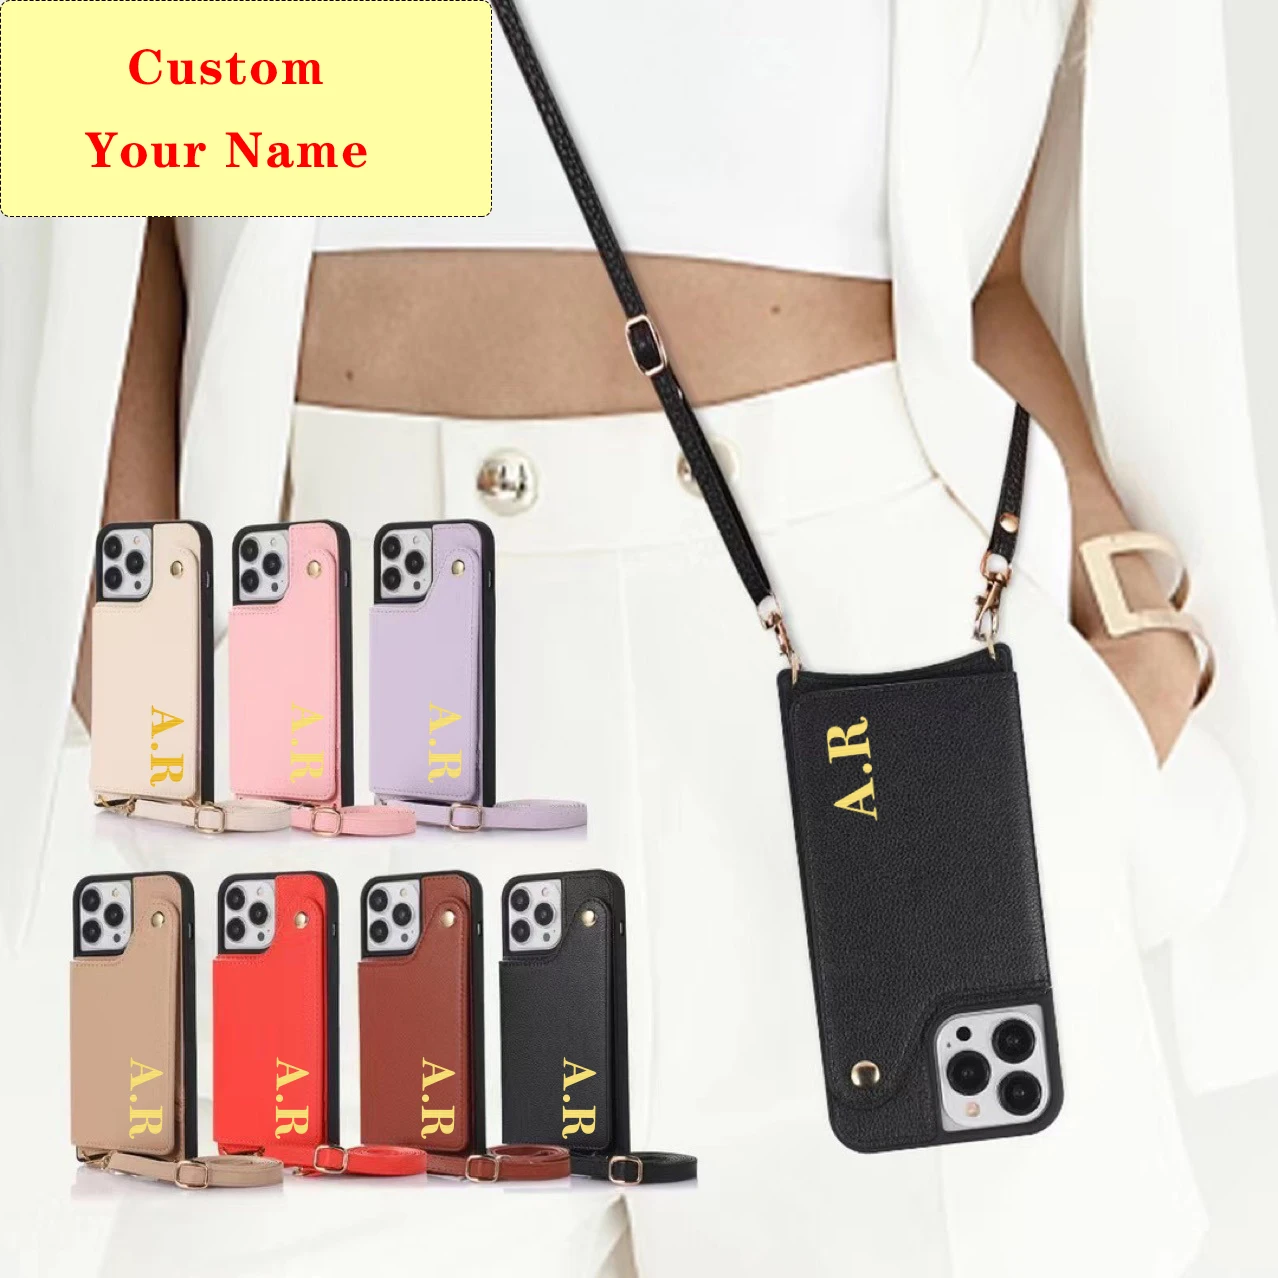 

Luxury Brand Personalise Name A-Z Letters Leather Crossbody Lanyard Hard Case For iPhone 13 12 11 Pro X XS Max XR 7 8 Plus Cover